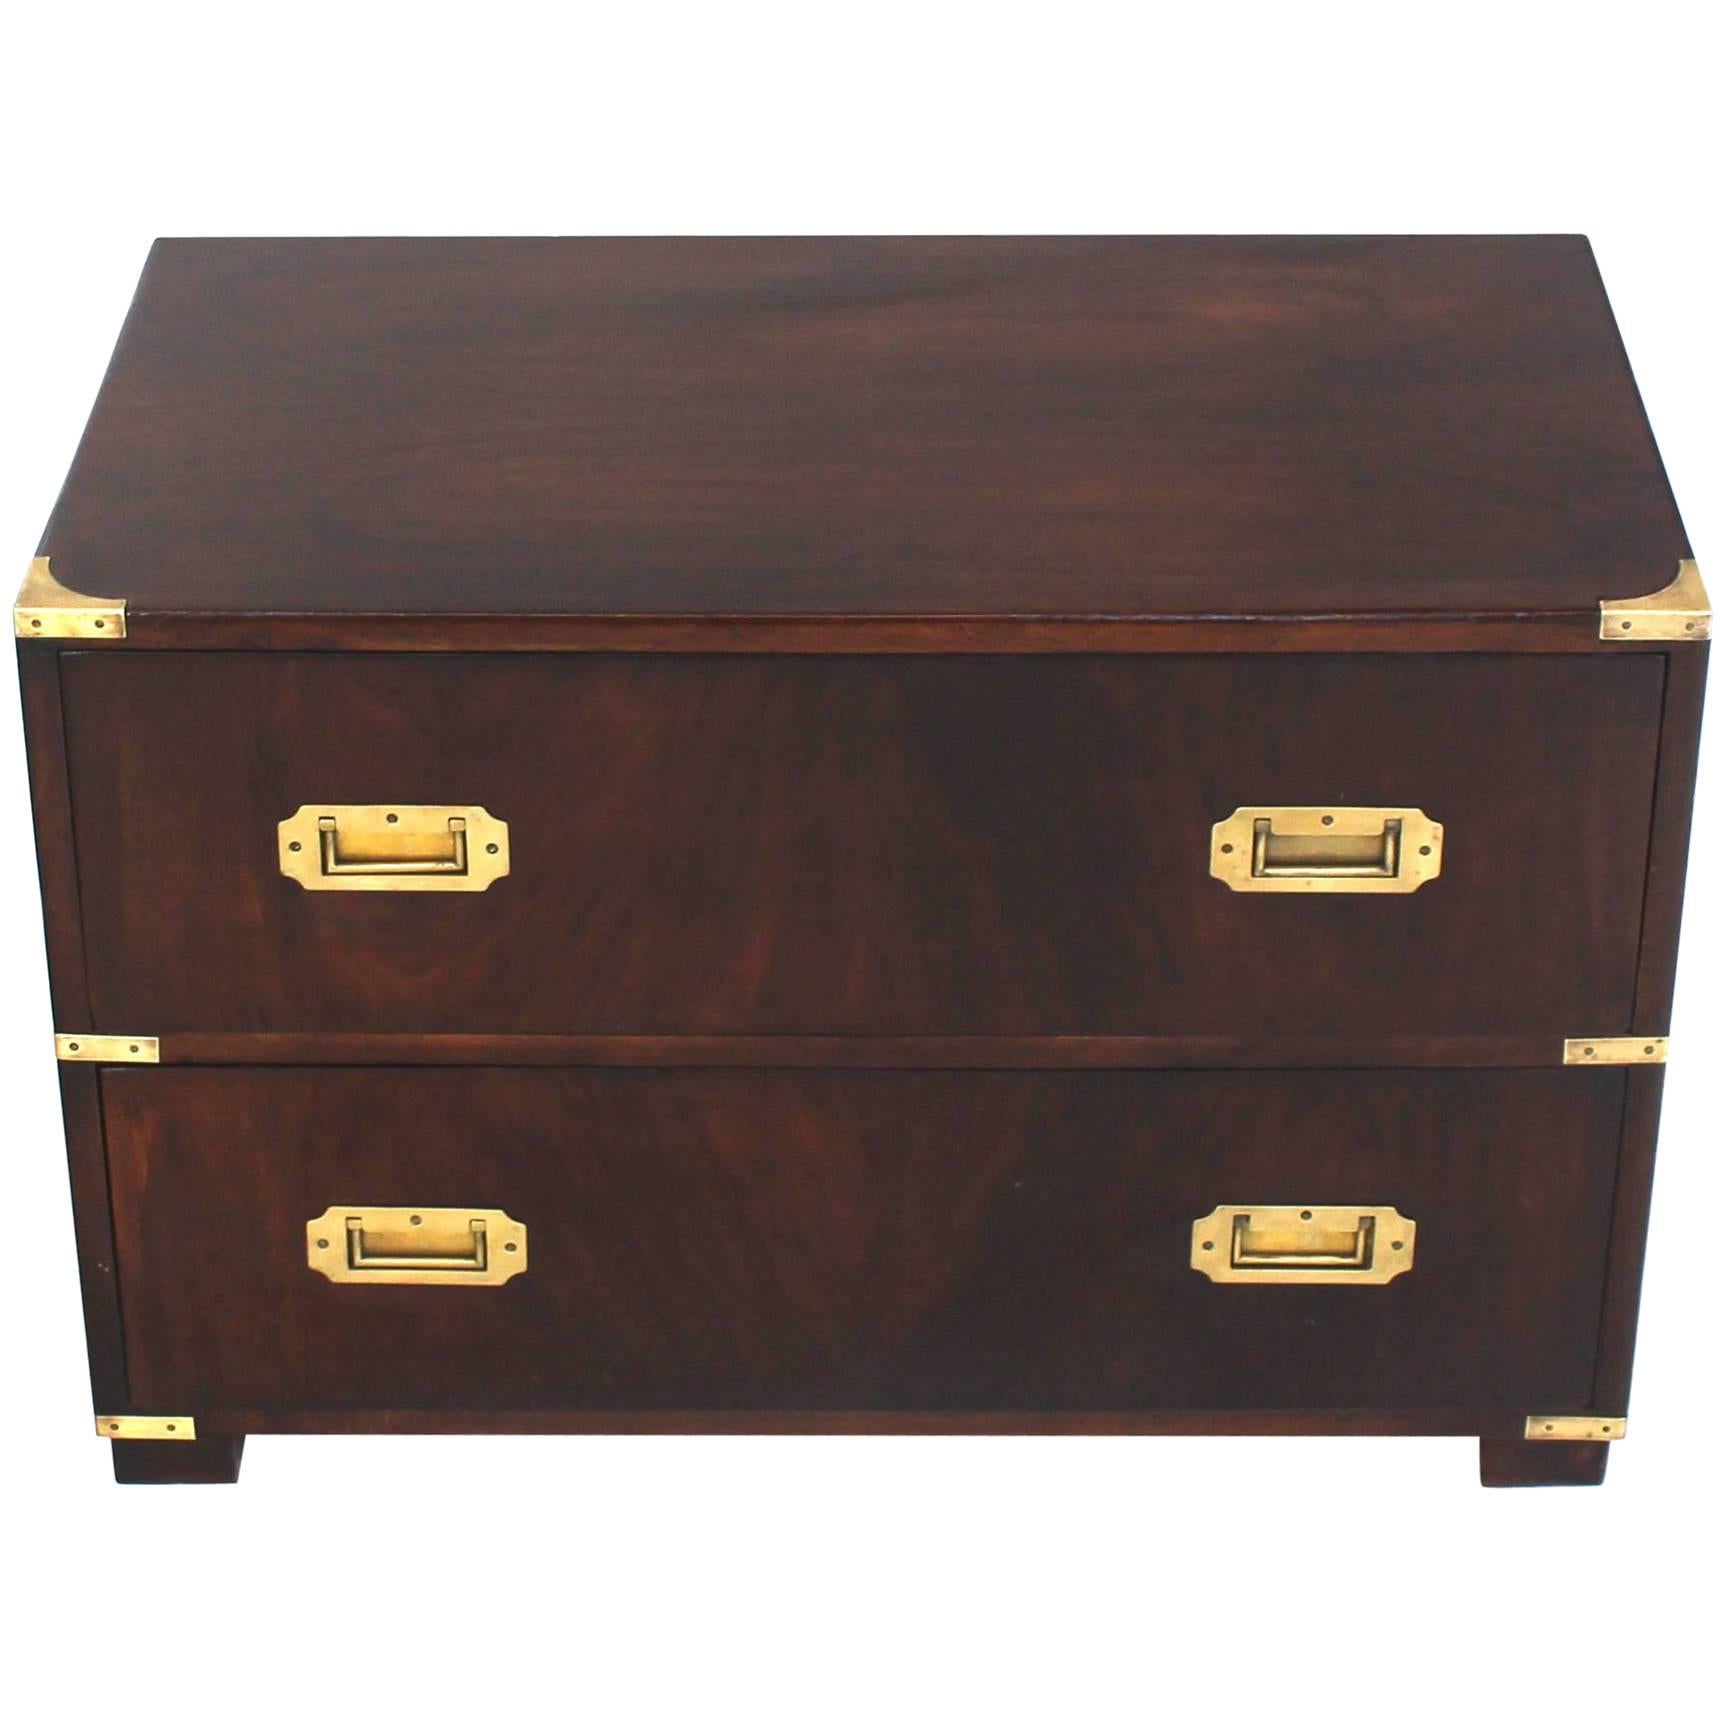 Two-Drawer Mid-Century Modern Rosewood and Brass Campaign Style Chest Stand